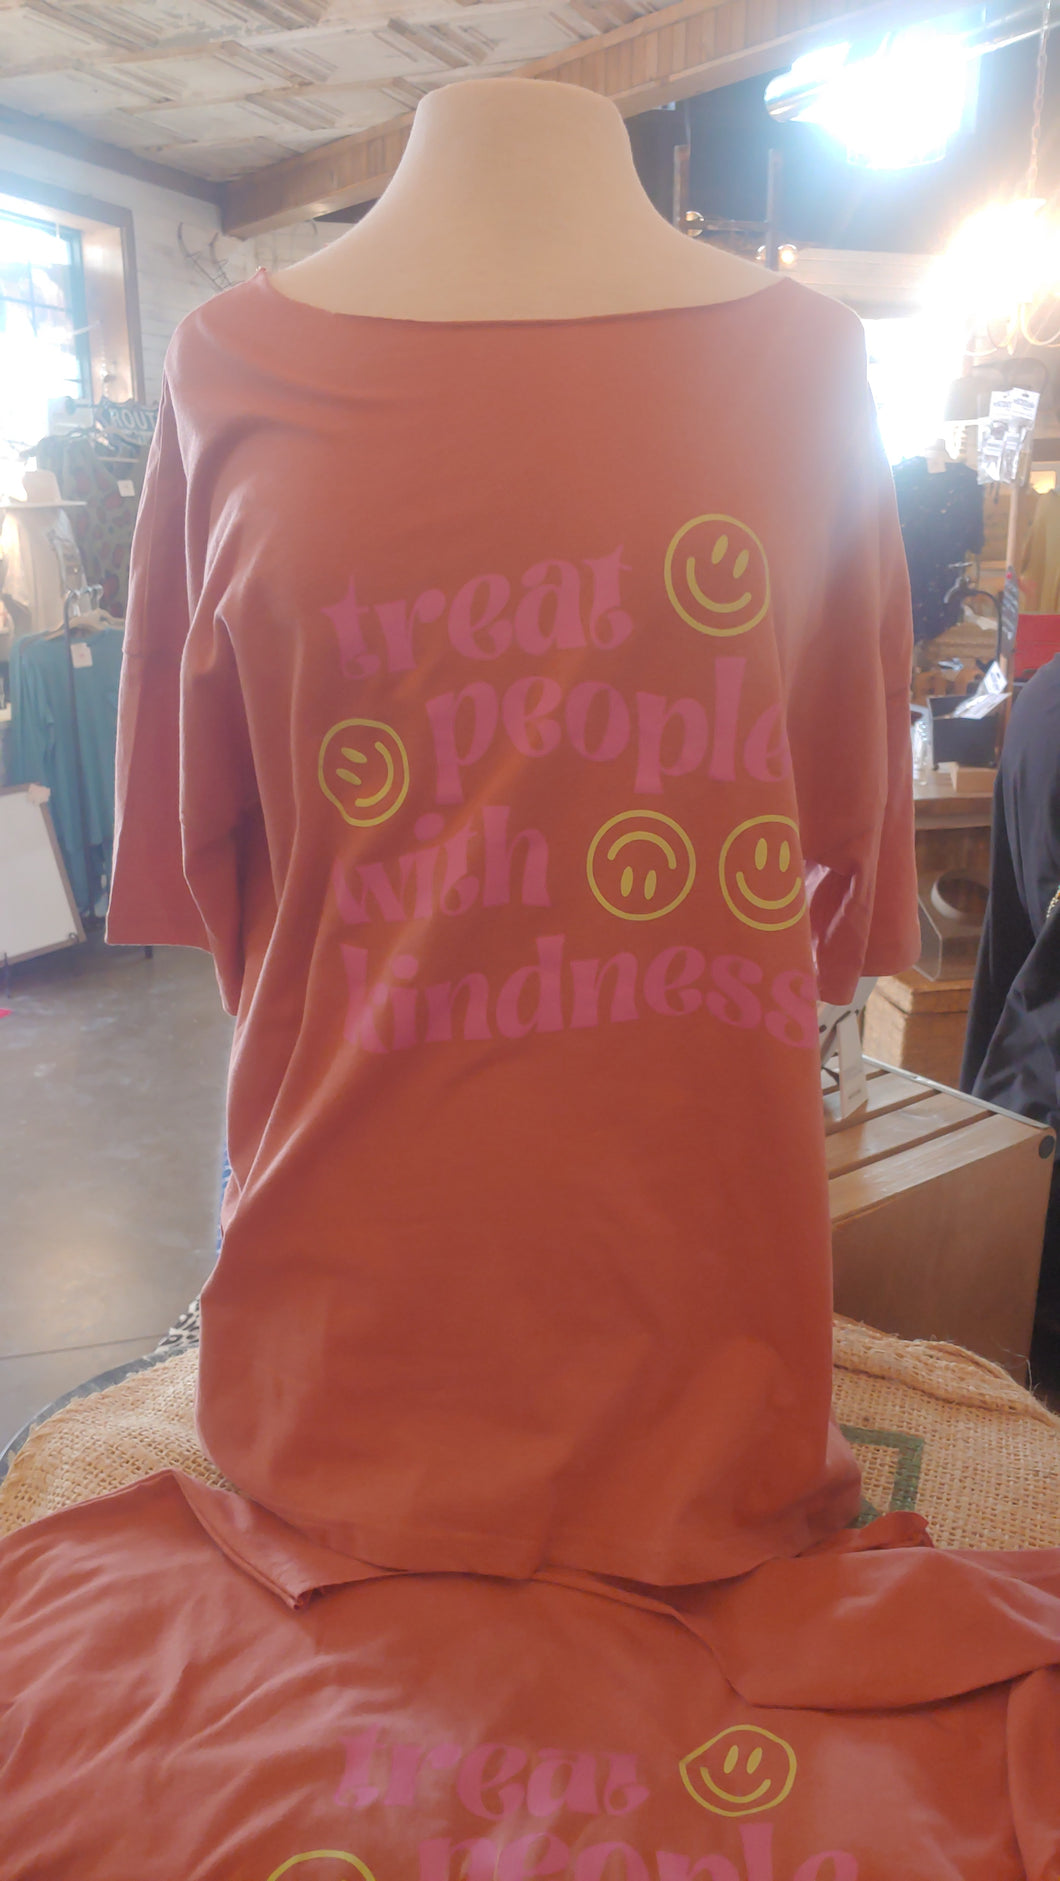 T-Shirt: Treat people with kindness